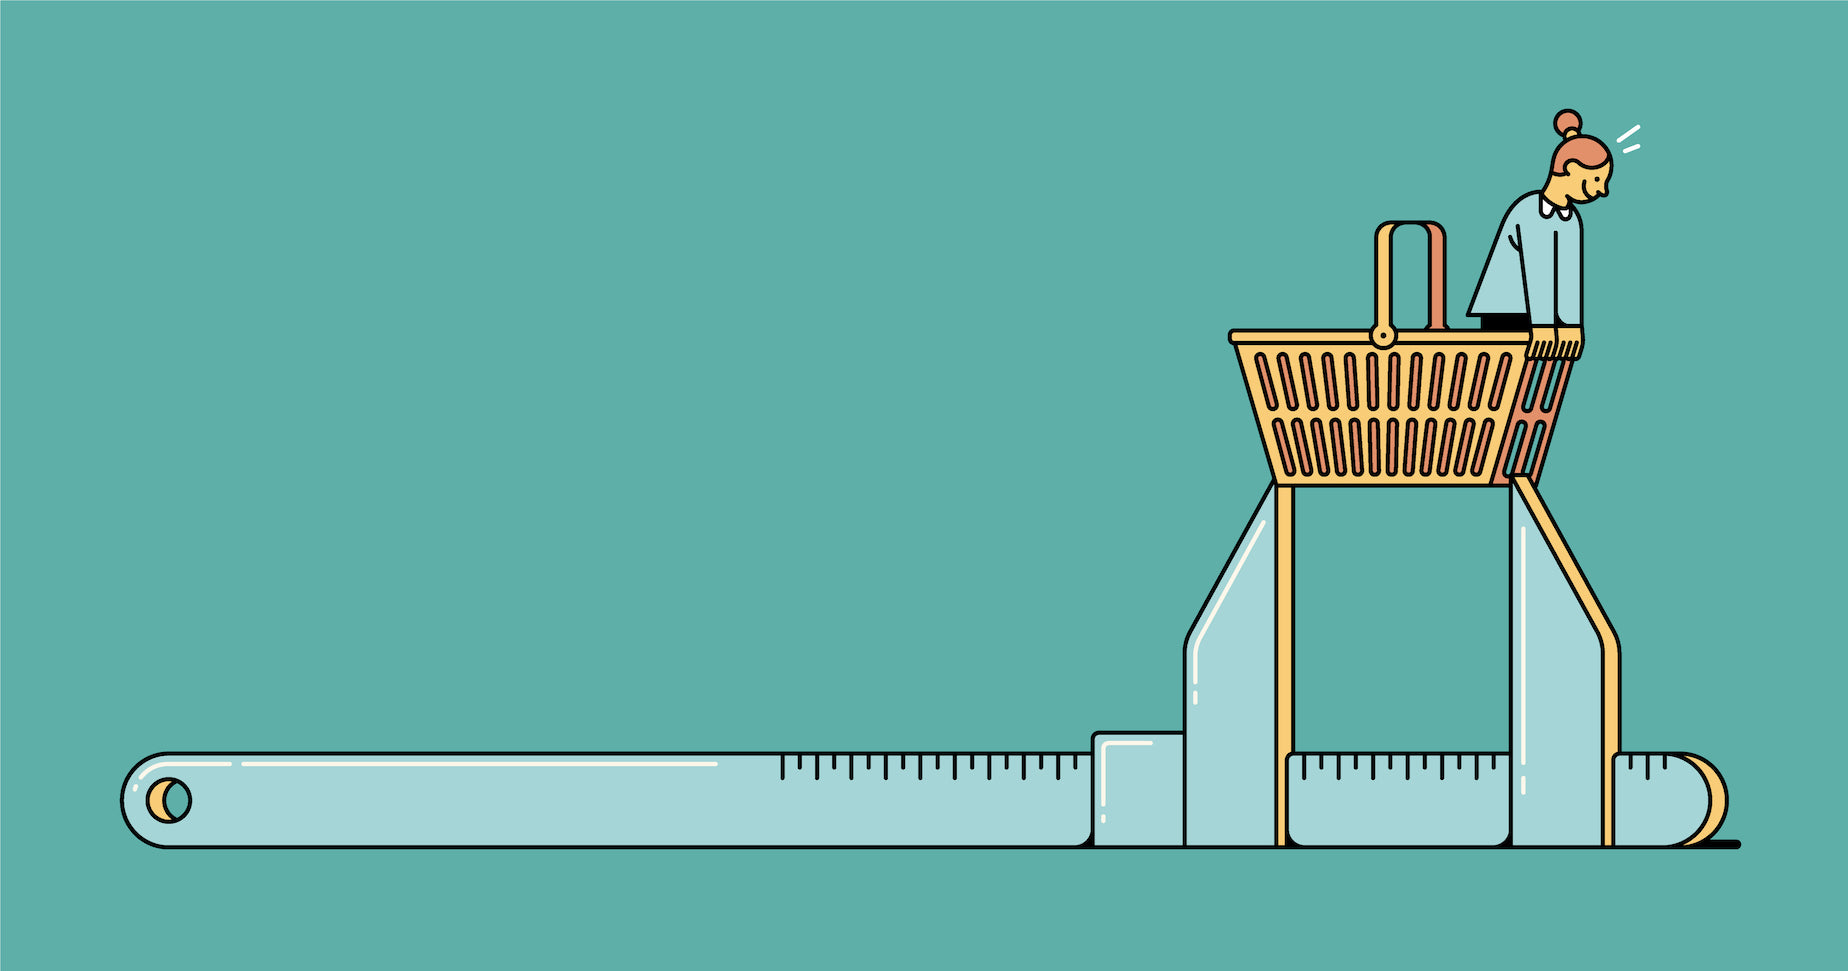 Illustration of a tool measuring a shopping cart, showing how key performance indicators help you size up and analyze business growth